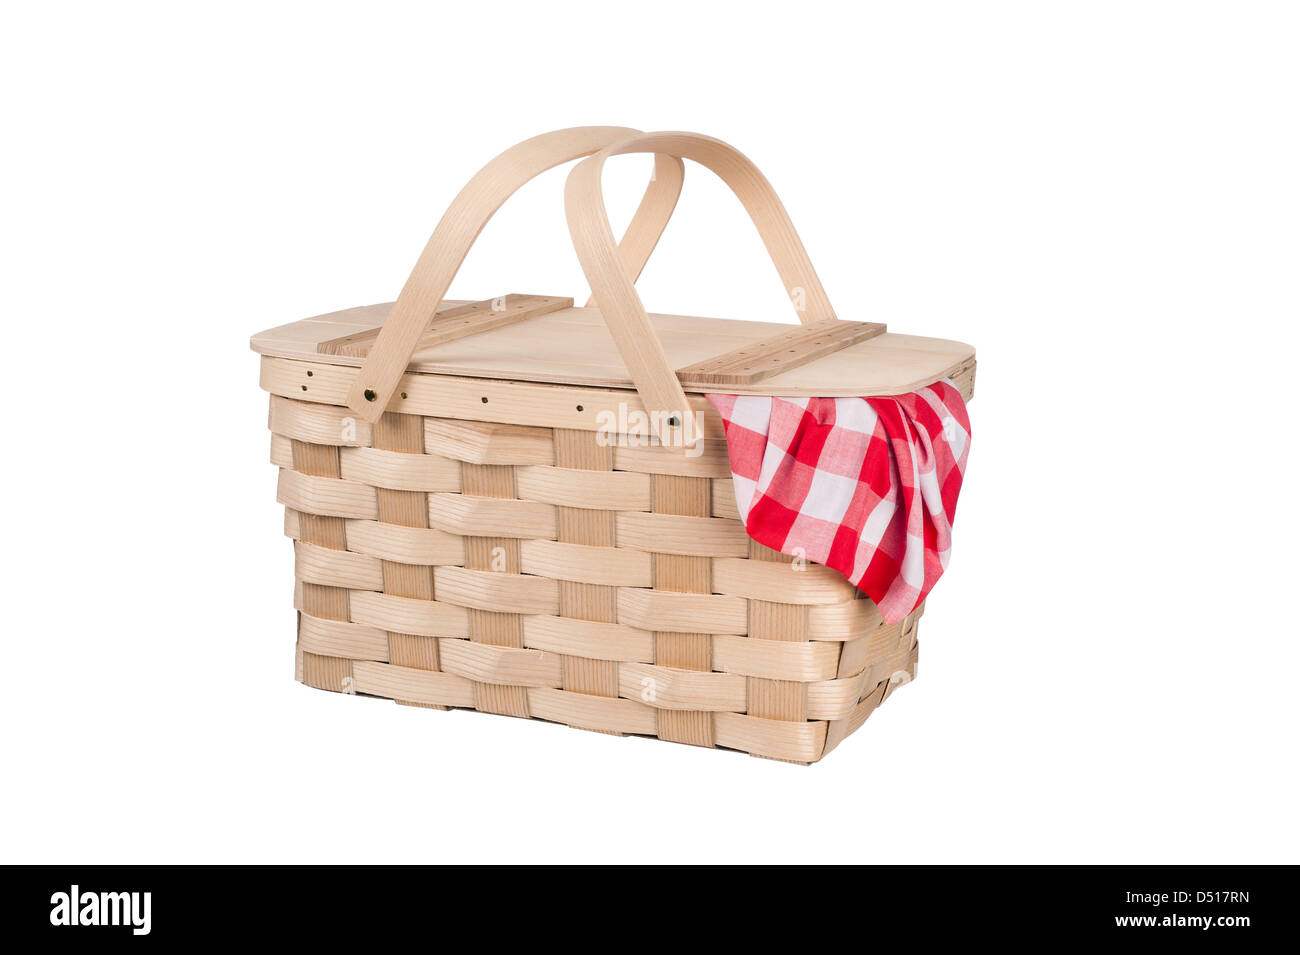 A new wicker and wood picnic basket with a red checkered tablecloth peeking out the side. Isolated on white. Stock Photo